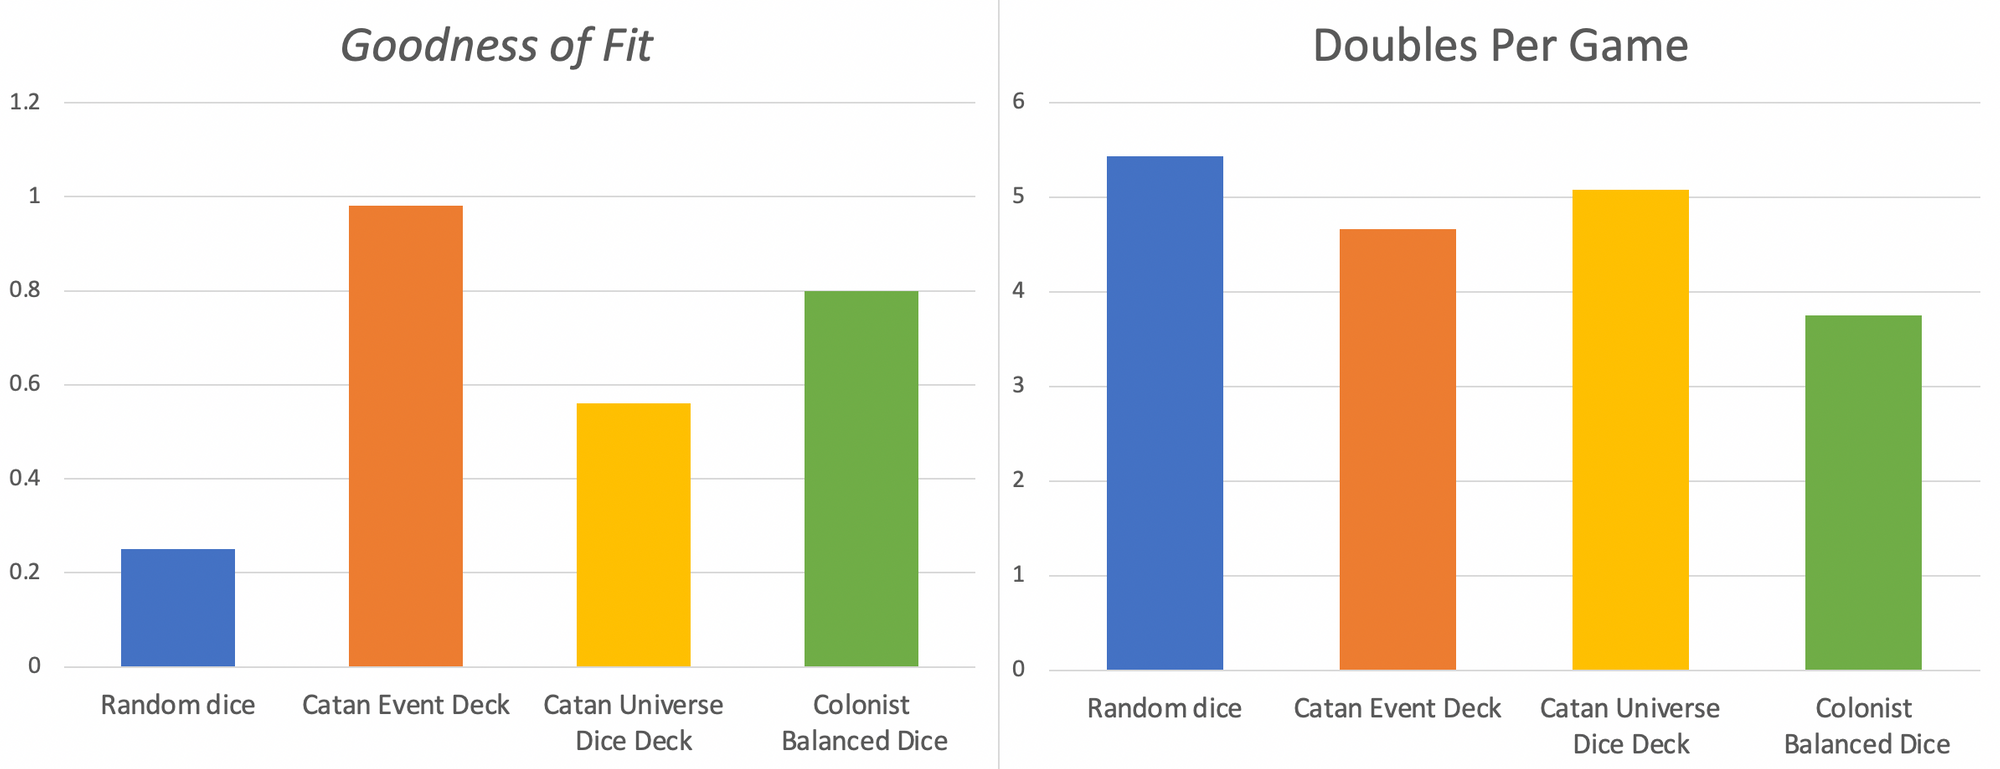 Goodness of fit vs doubles per game